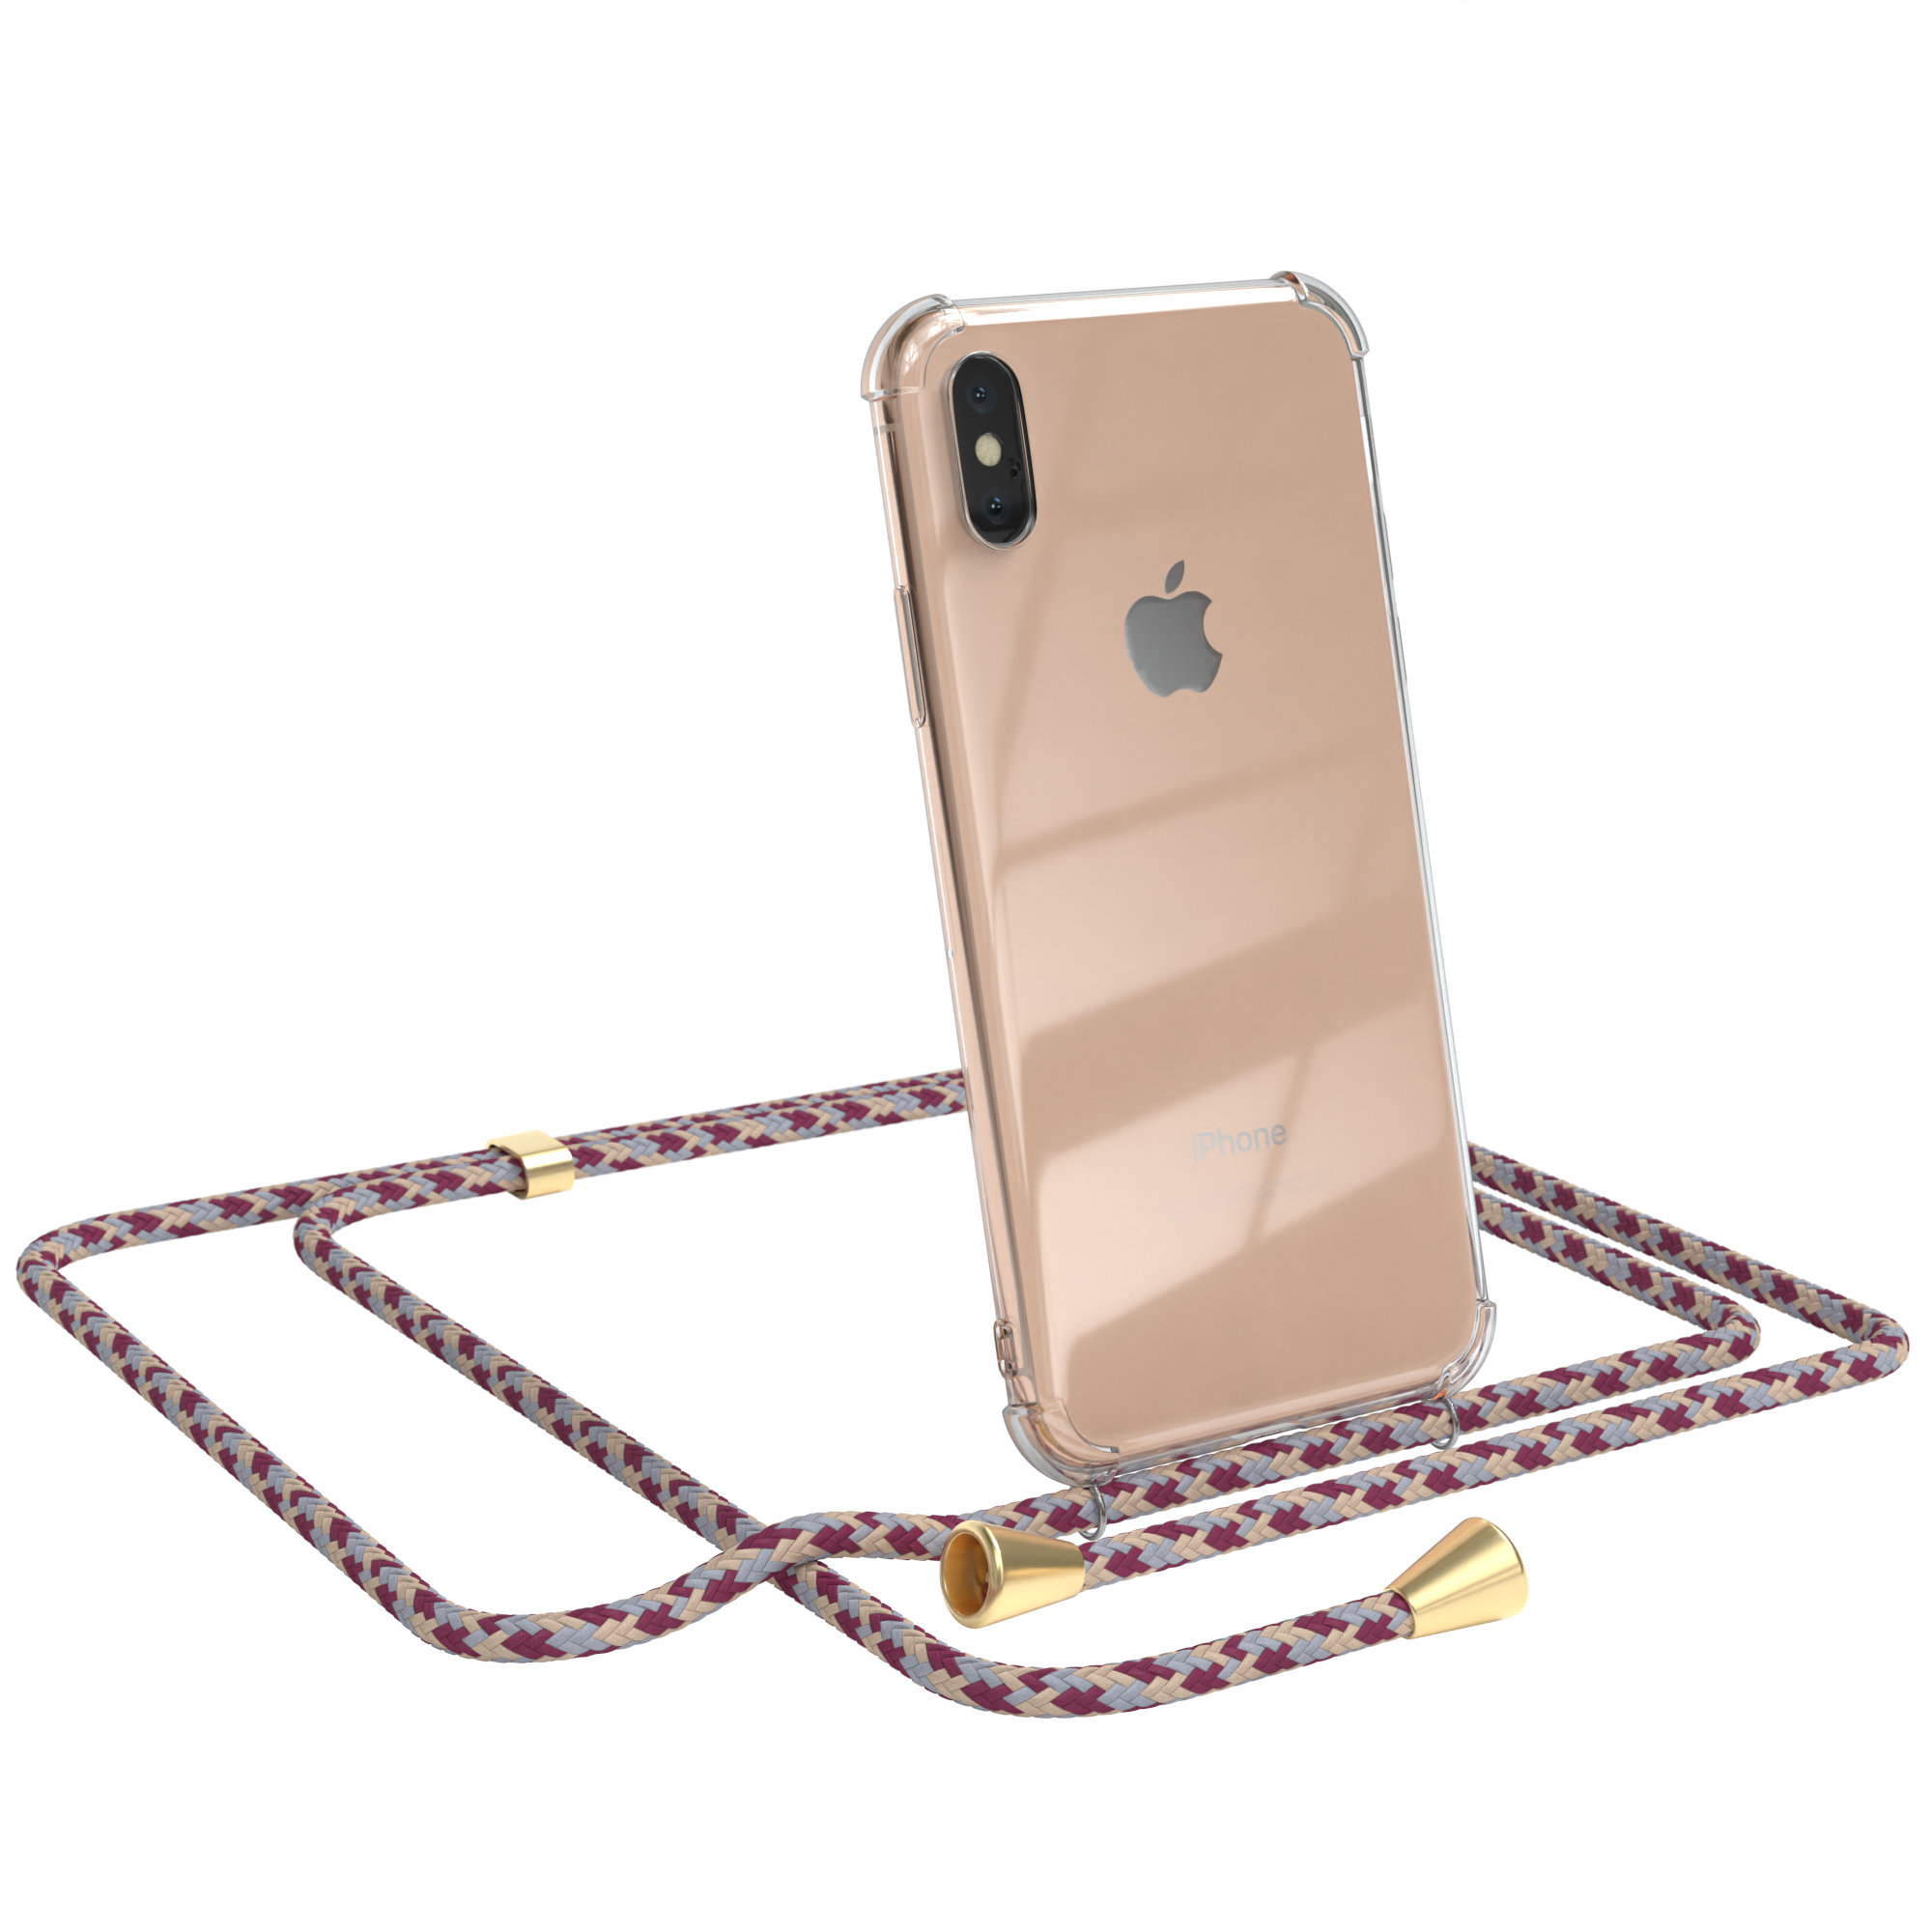 normal, Max, XS Clips iPhone Rot Camouflage EAZY Gold Apple, Umhängetasche, CASE Chain / Beige